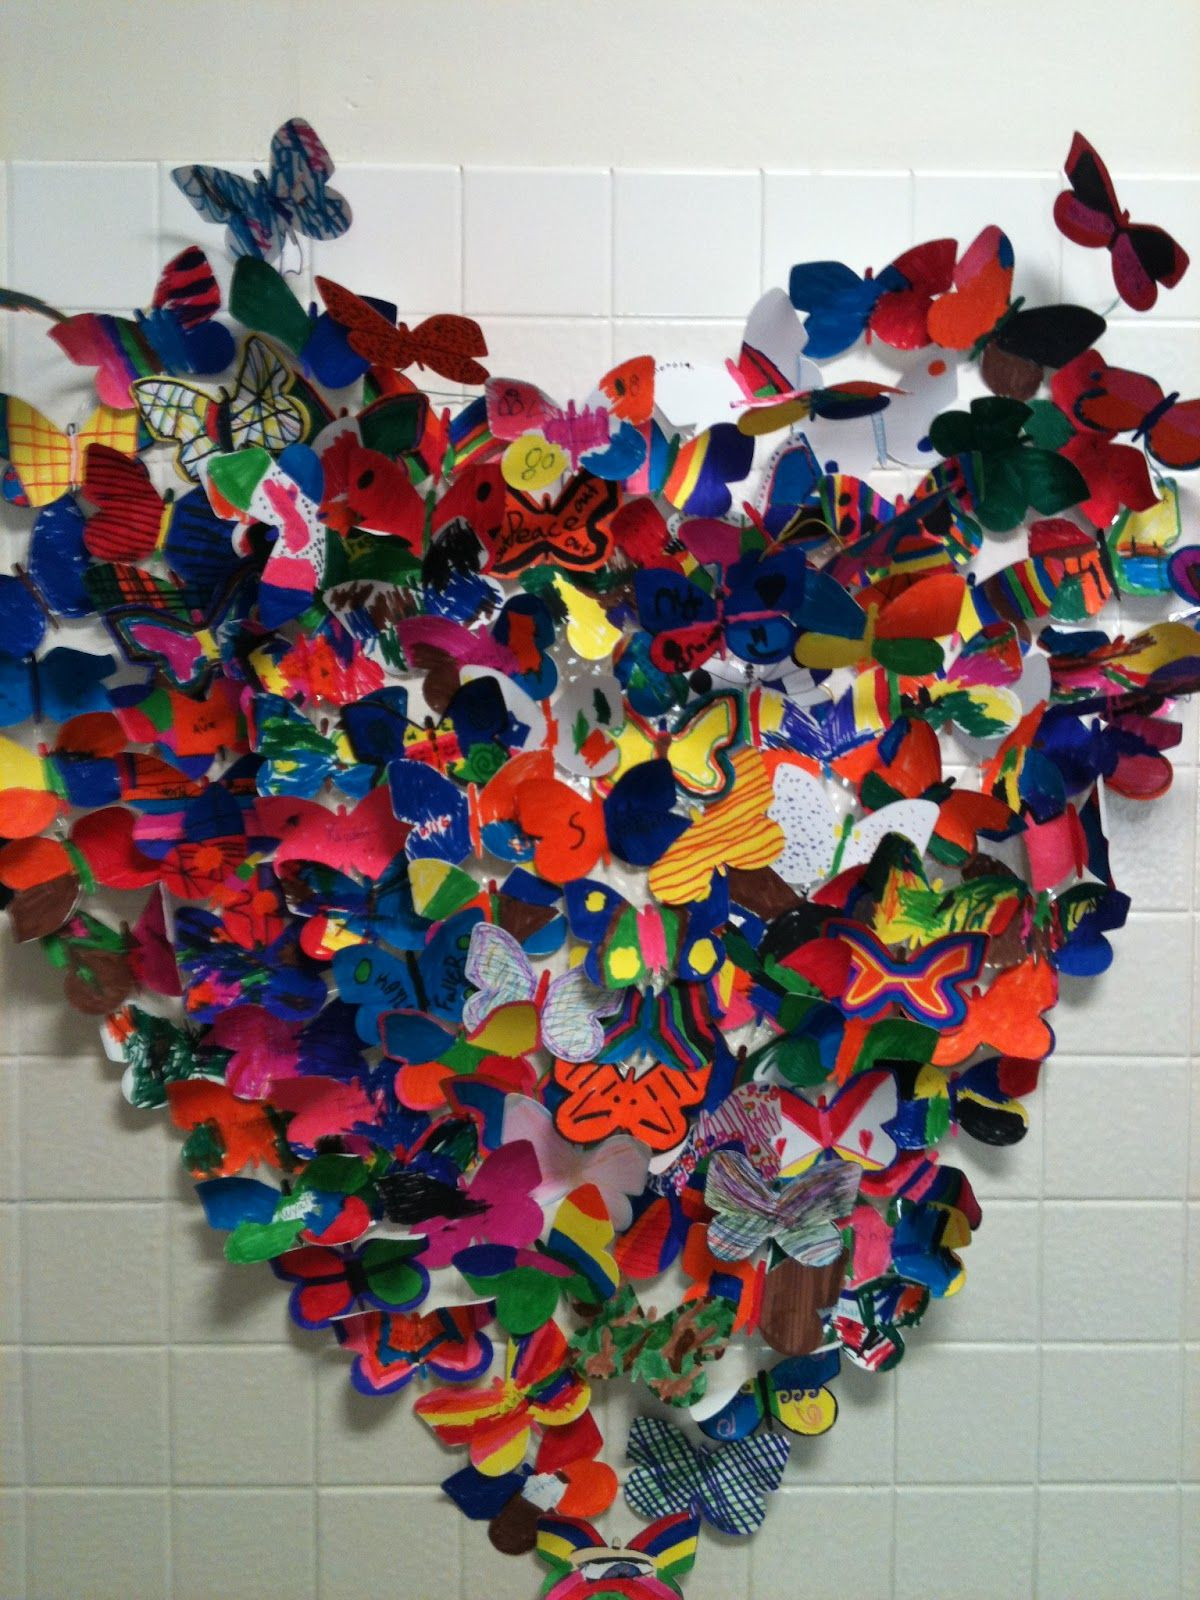 Group Art Projects For Adults
 Collaborative Butterfly Heart I could see making this